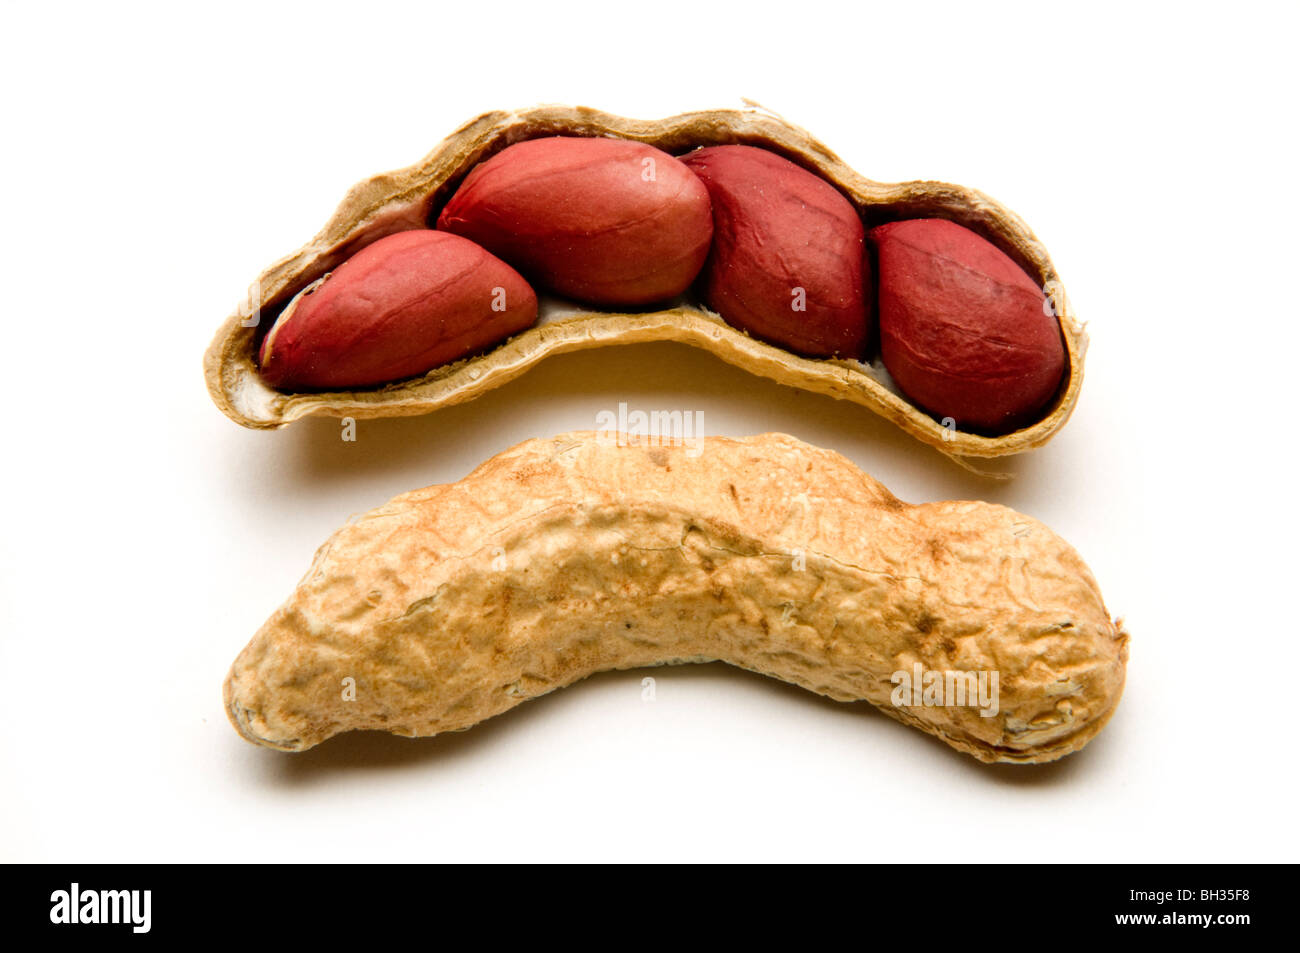 peanuts in open shell Stock Photo